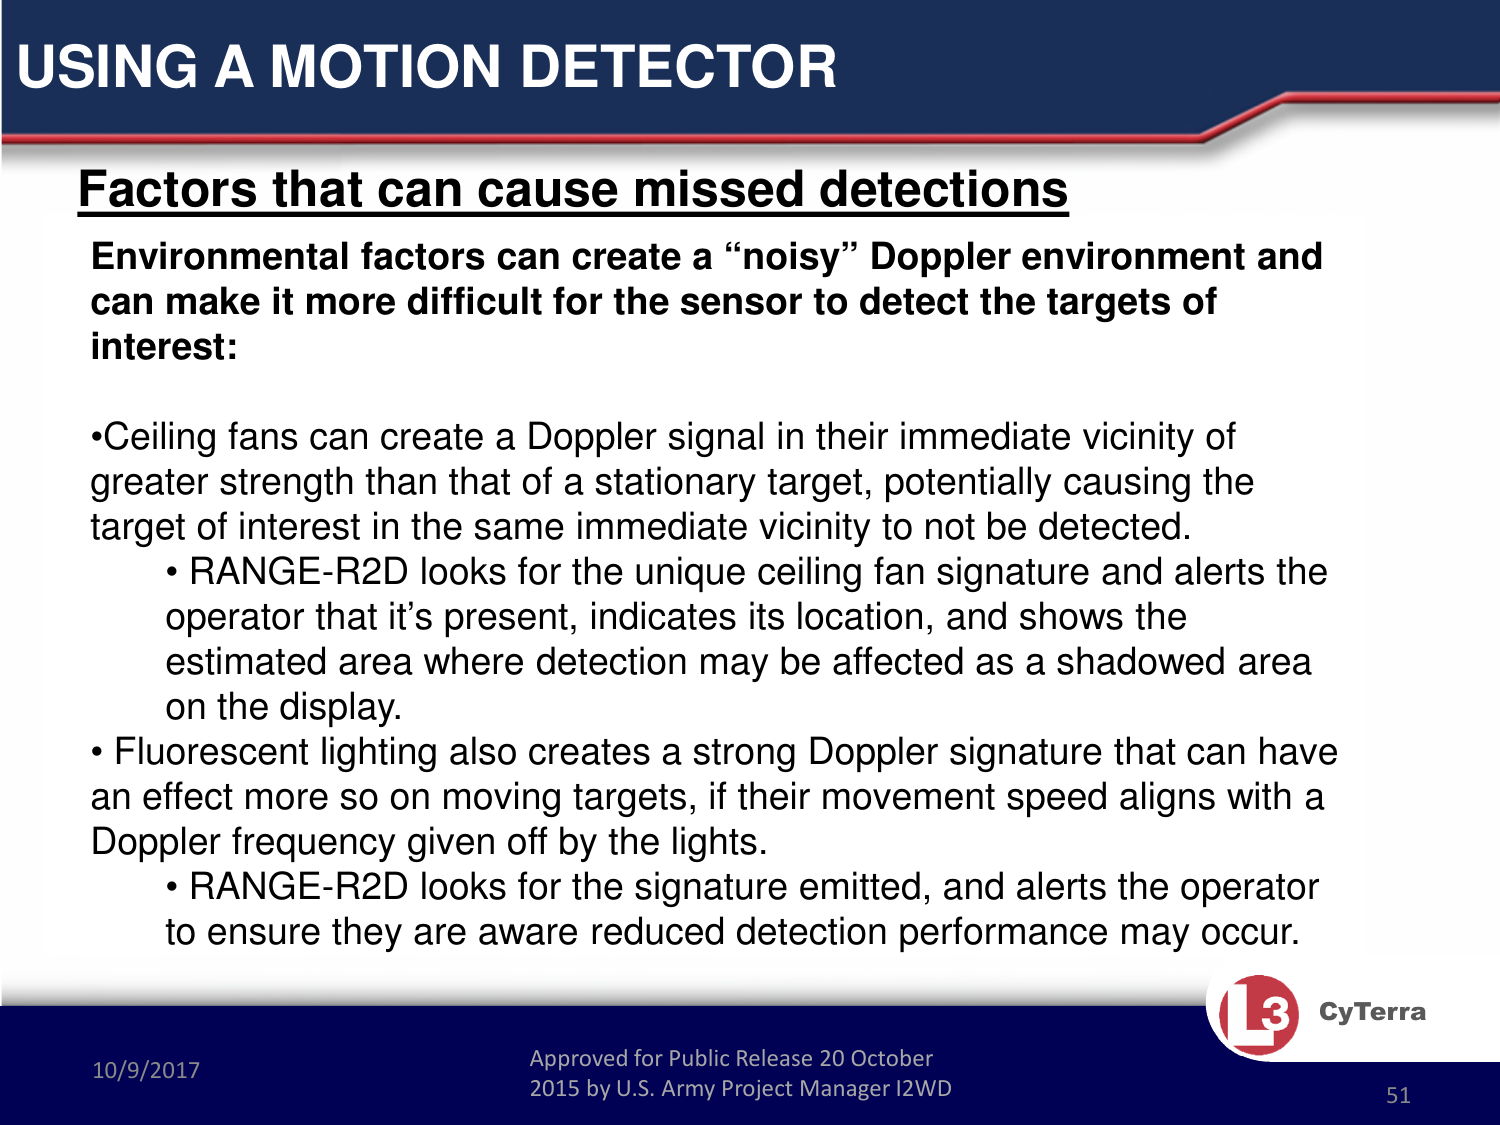 Approved for Public Release 20 October 2015 by U.S. Army Project Manager I2WD10/9/2017 Approved for Public Release 20 October 2015 by U.S. Army Project Manager I2WD 51CyTerraFactors that can cause missed detectionsEnvironmental factors can create a “noisy” Doppler environment and can make it more difficult for the sensor to detect the targets of interest:•Ceiling fans can create a Doppler signal in their immediate vicinity of greater strength than that of a stationary target, potentially causing the target of interest in the same immediate vicinity to not be detected.• RANGE-R2D looks for the unique ceiling fan signature and alerts the operator that it’s present, indicates its location, and shows the estimated area where detection may be affected as a shadowed area on the display.• Fluorescent lighting also creates a strong Doppler signature that can have an effect more so on moving targets, if their movement speed aligns with a Doppler frequency given off by the lights.• RANGE-R2D looks for the signature emitted, and alerts the operator to ensure they are aware reduced detection performance may occur.USING A MOTION DETECTOR